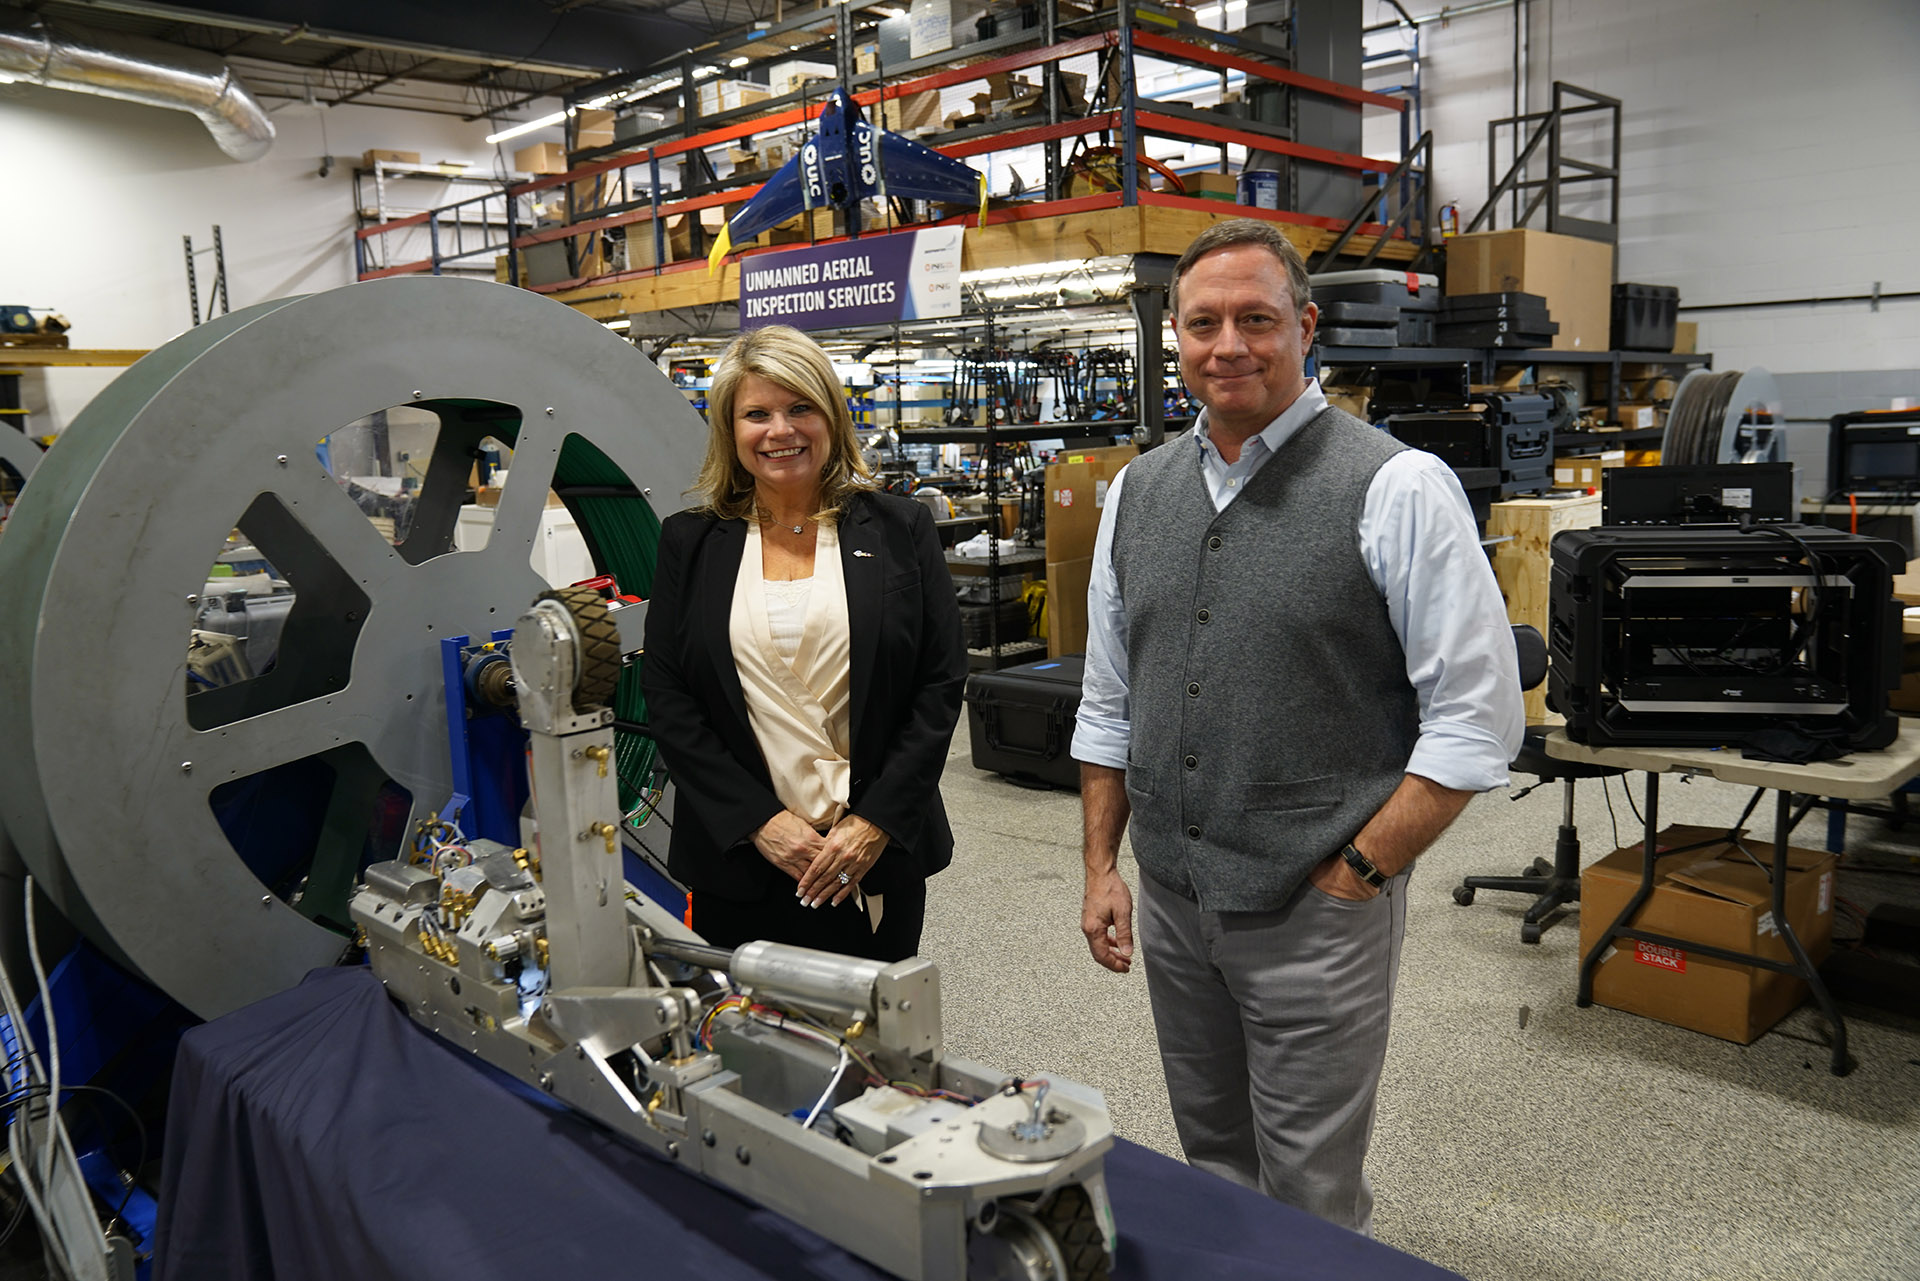 Jodi Giglio standing next to Greg Penza, founder and CEO of ULC Robotics, and a CISBOT robot.